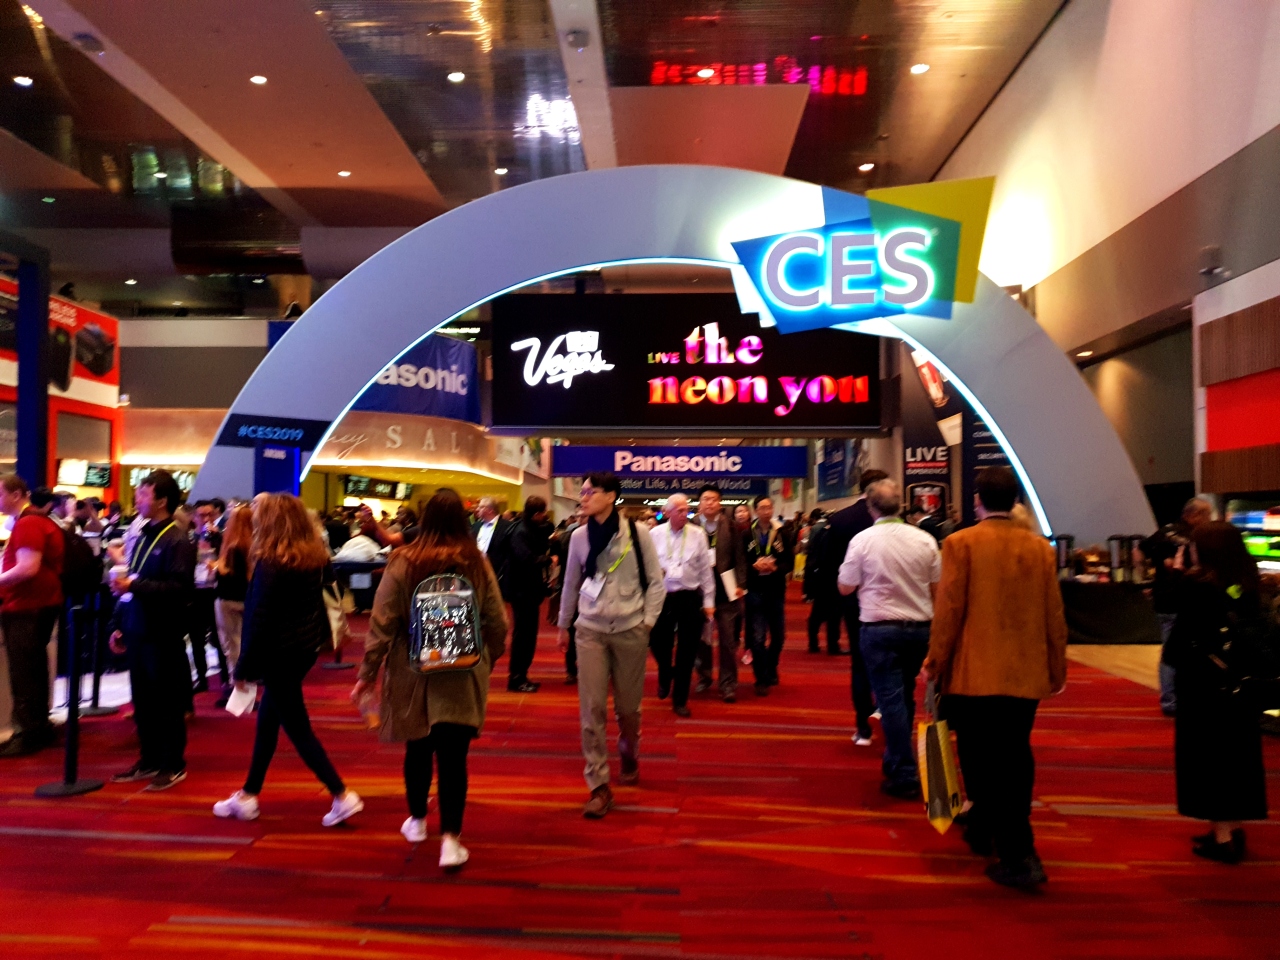 Visitors walk around in the Las Vegas Convention Center in January 2019. (Photo by Song Su-hyun/The Korea Herald)